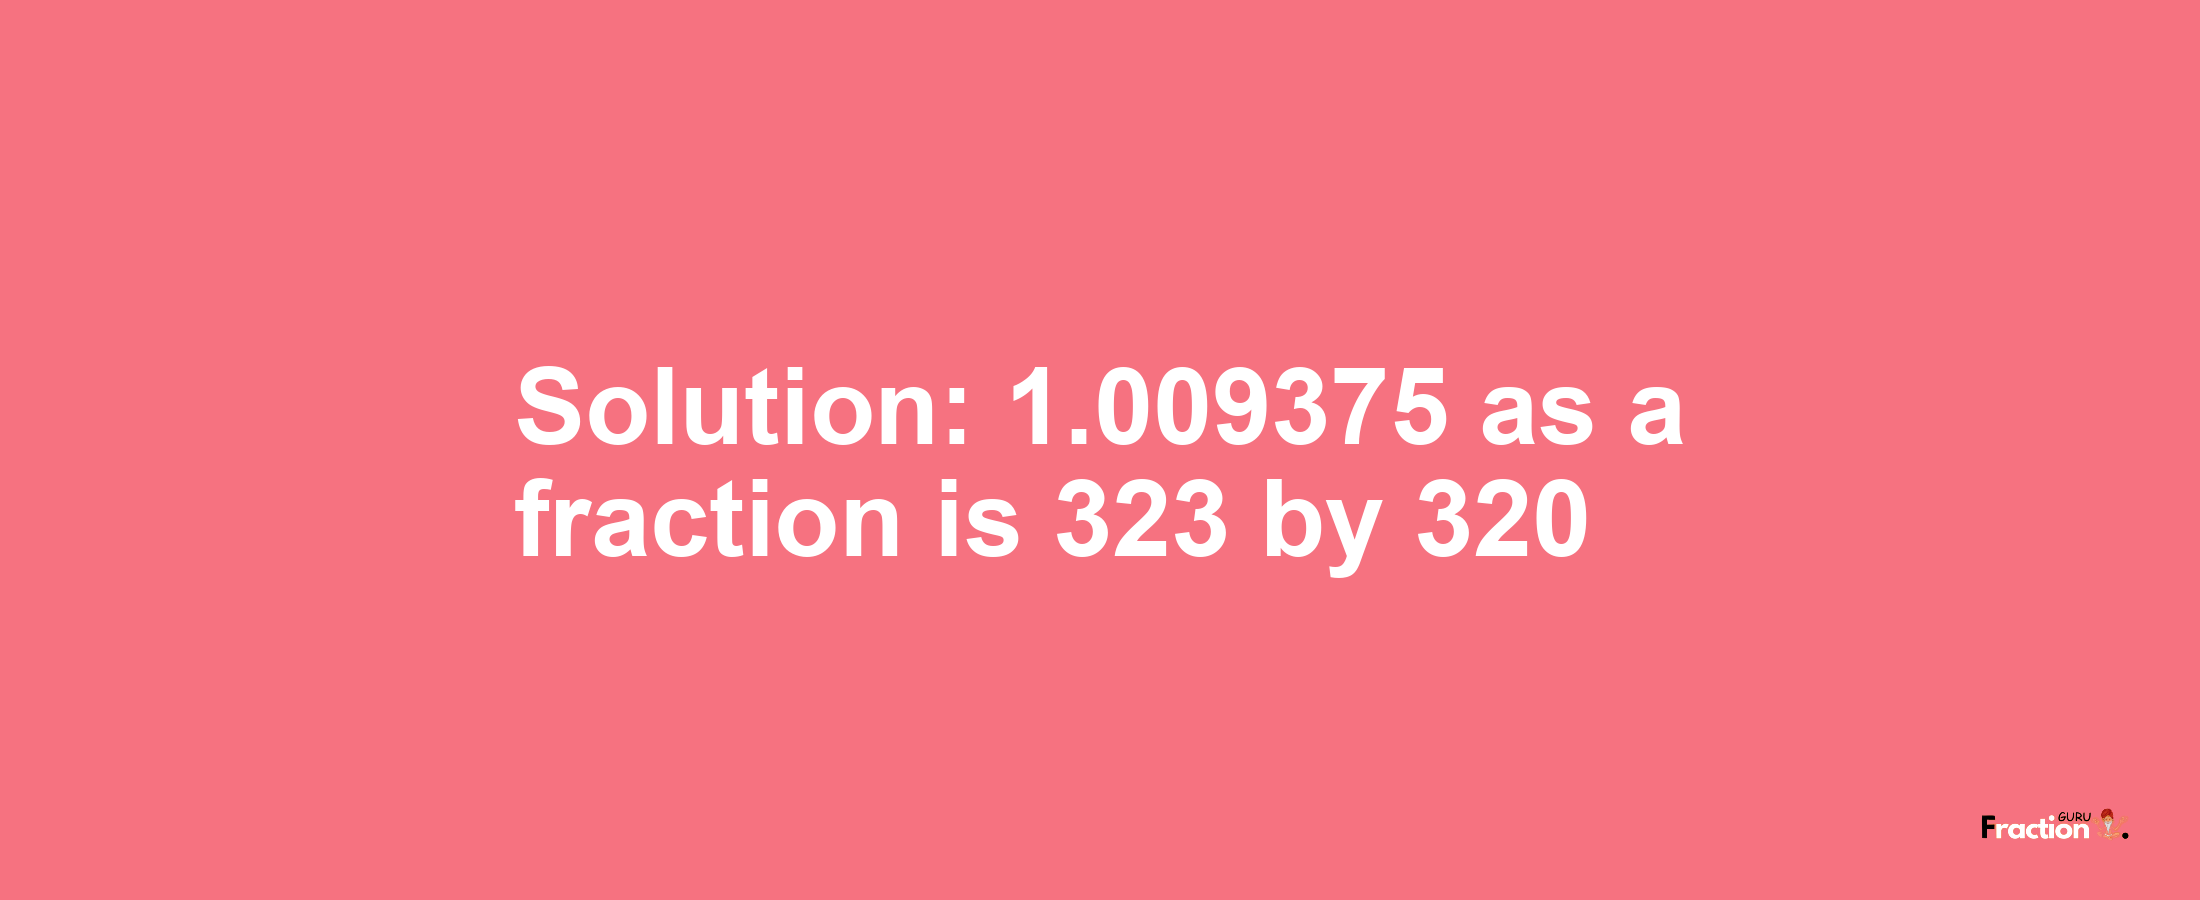 Solution:1.009375 as a fraction is 323/320